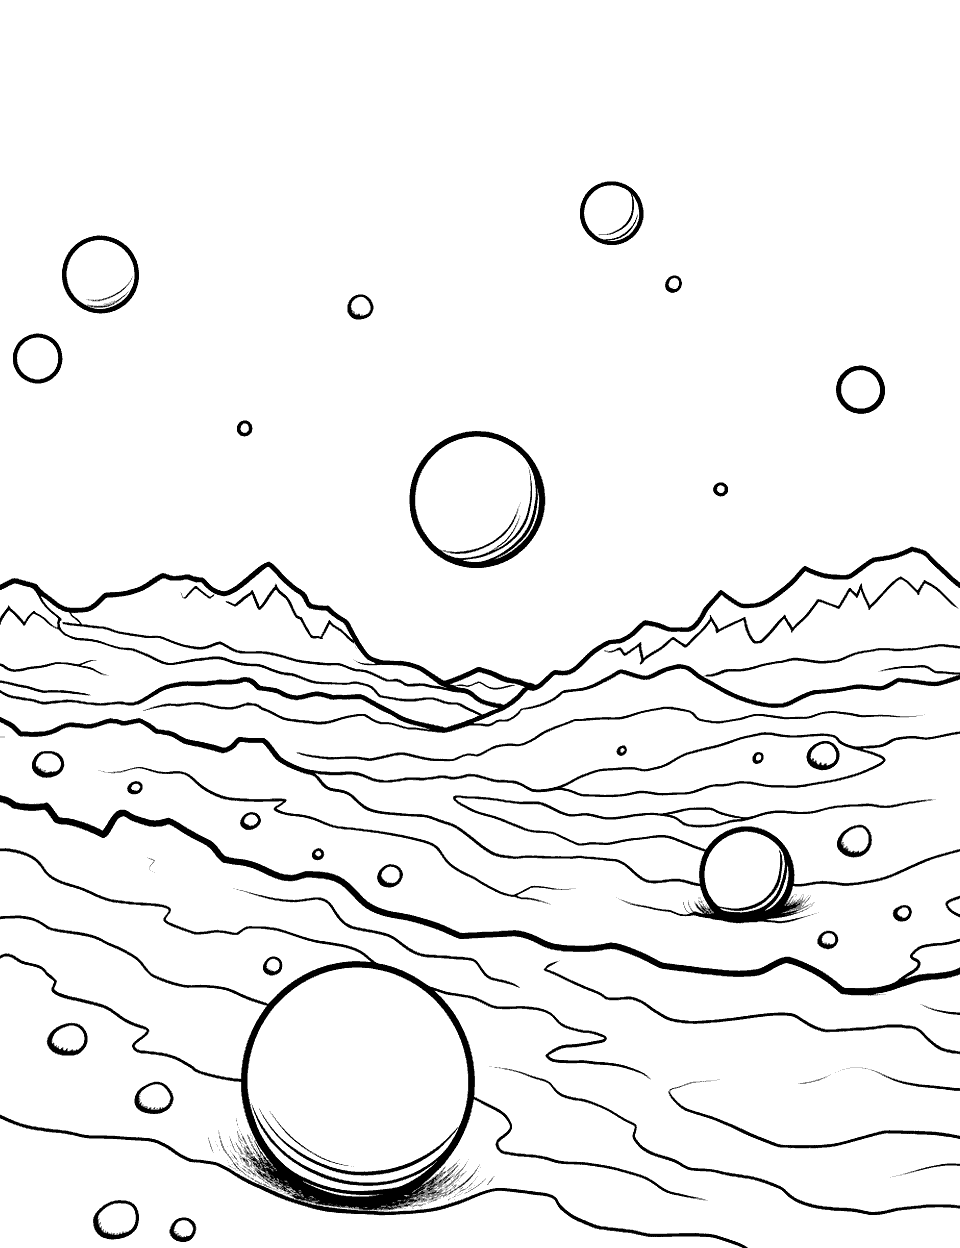 Mars' Polar Ice Caps Solar System Coloring Page - Mars shown with its polar ice caps and terrain.